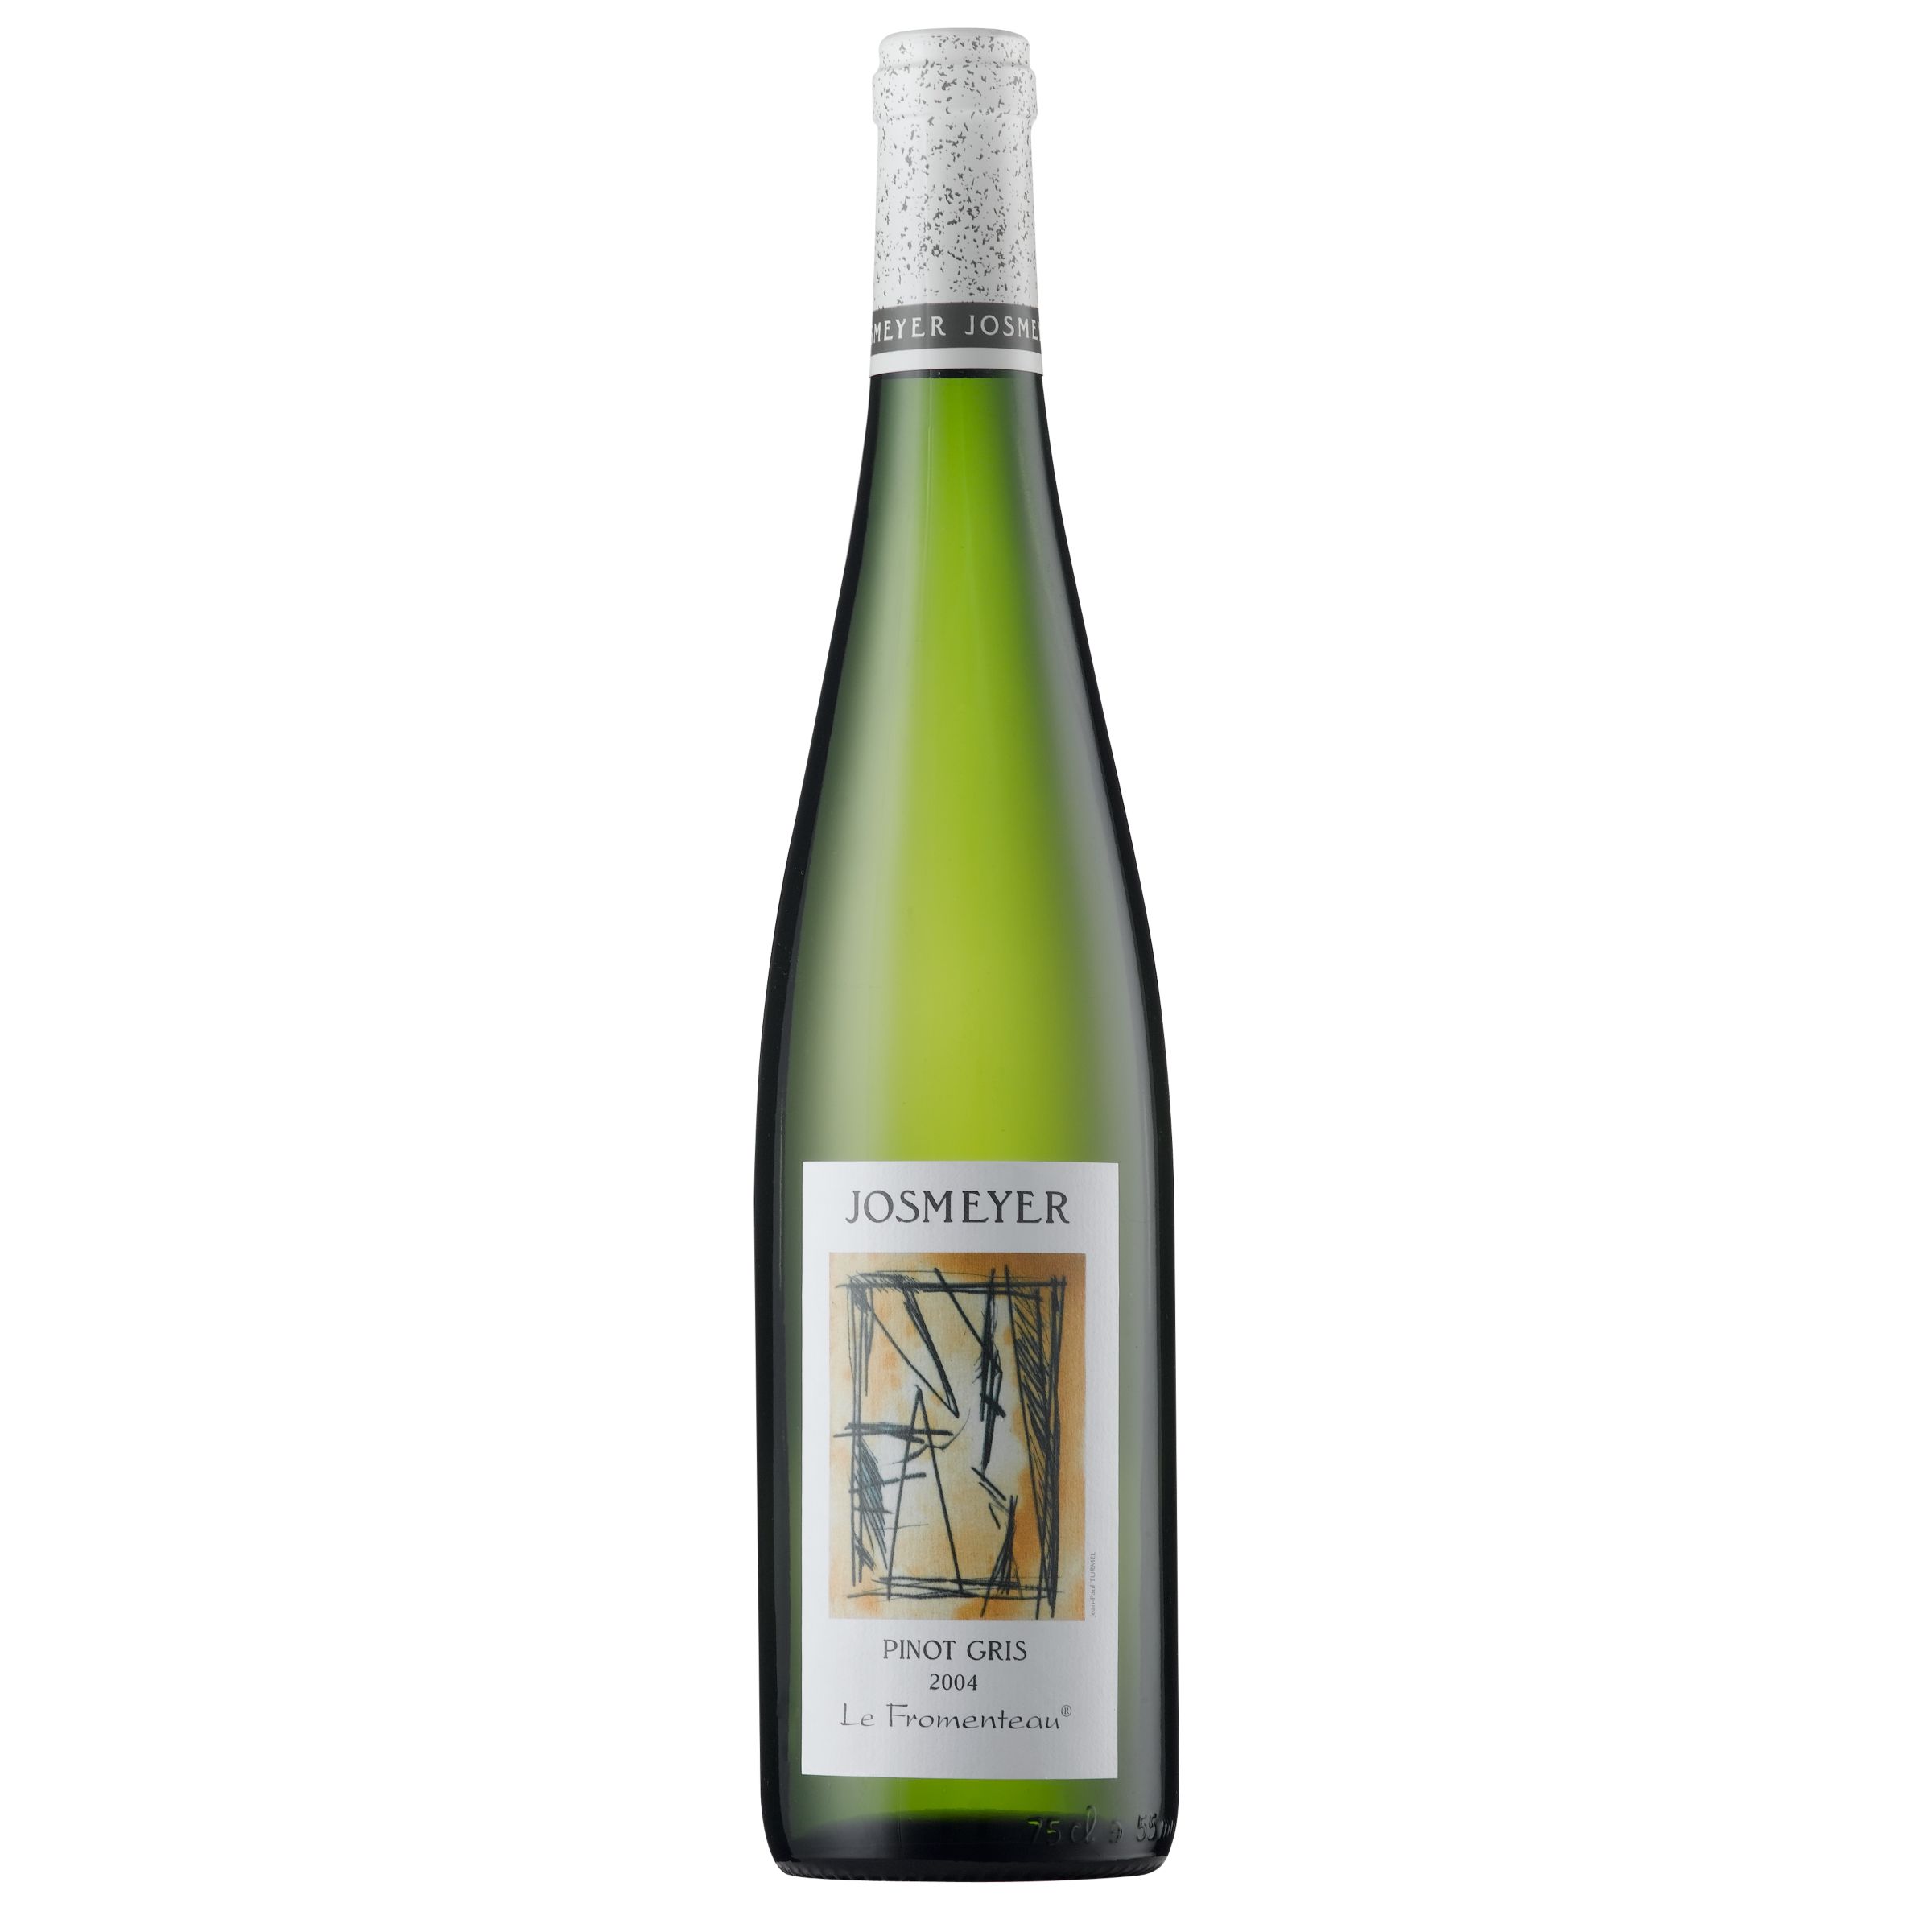 Josmeyer, Le Fromenteau Pinot Gris 2006 Alsace, France at John Lewis